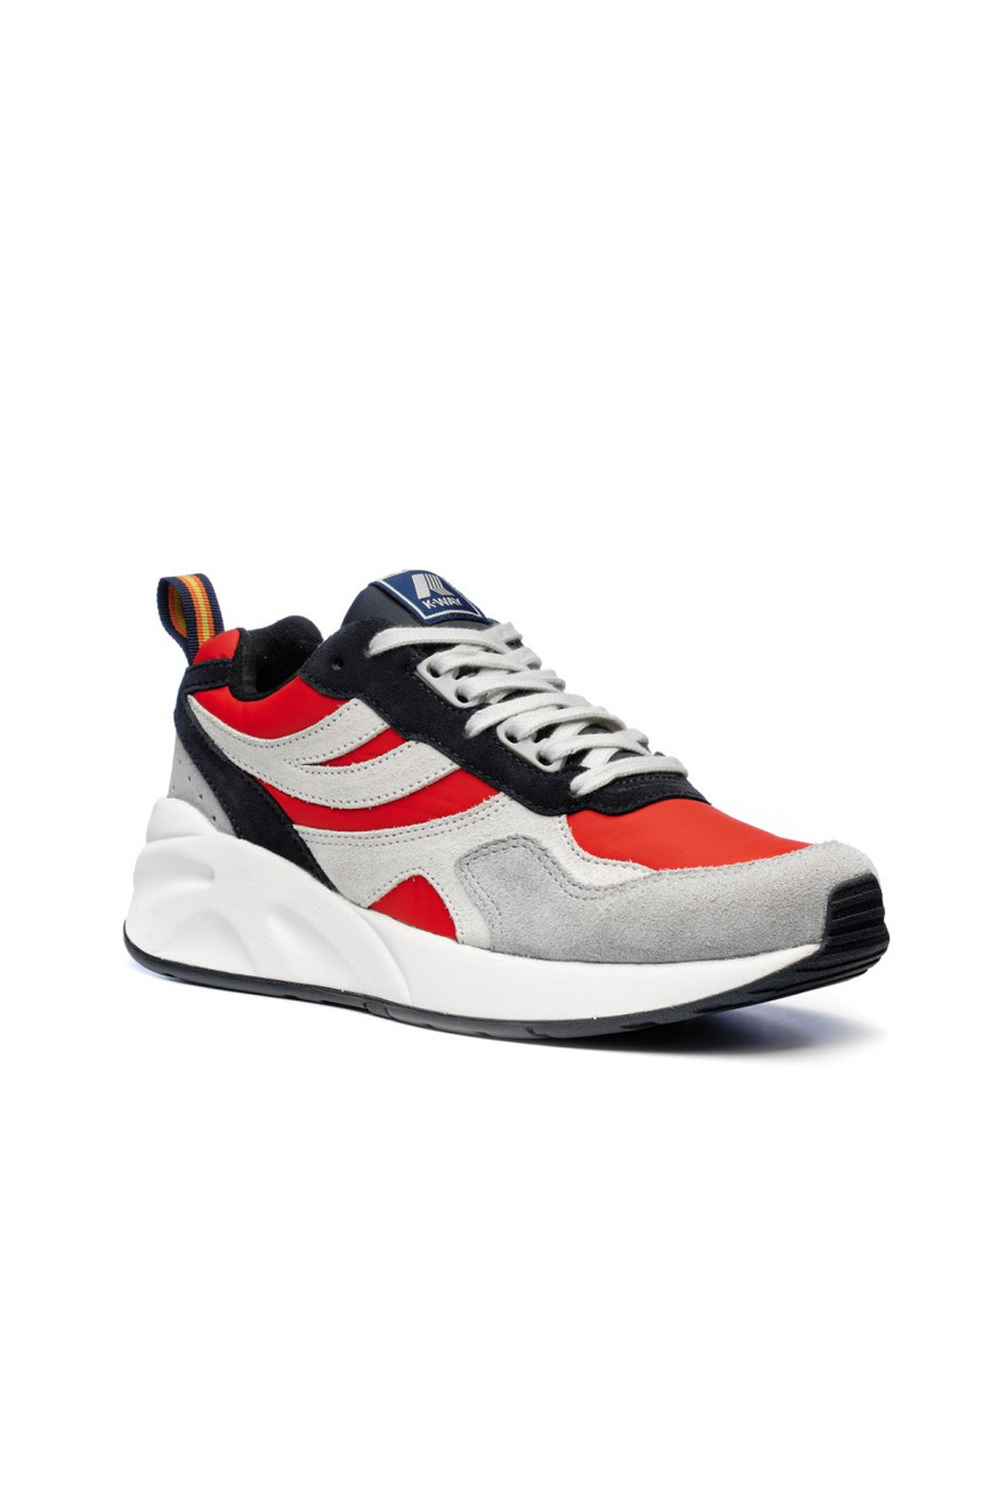 SNEAKERS TRAINING 3.0 LACES RED LIGHT GREY WHITE BLUE NAVY